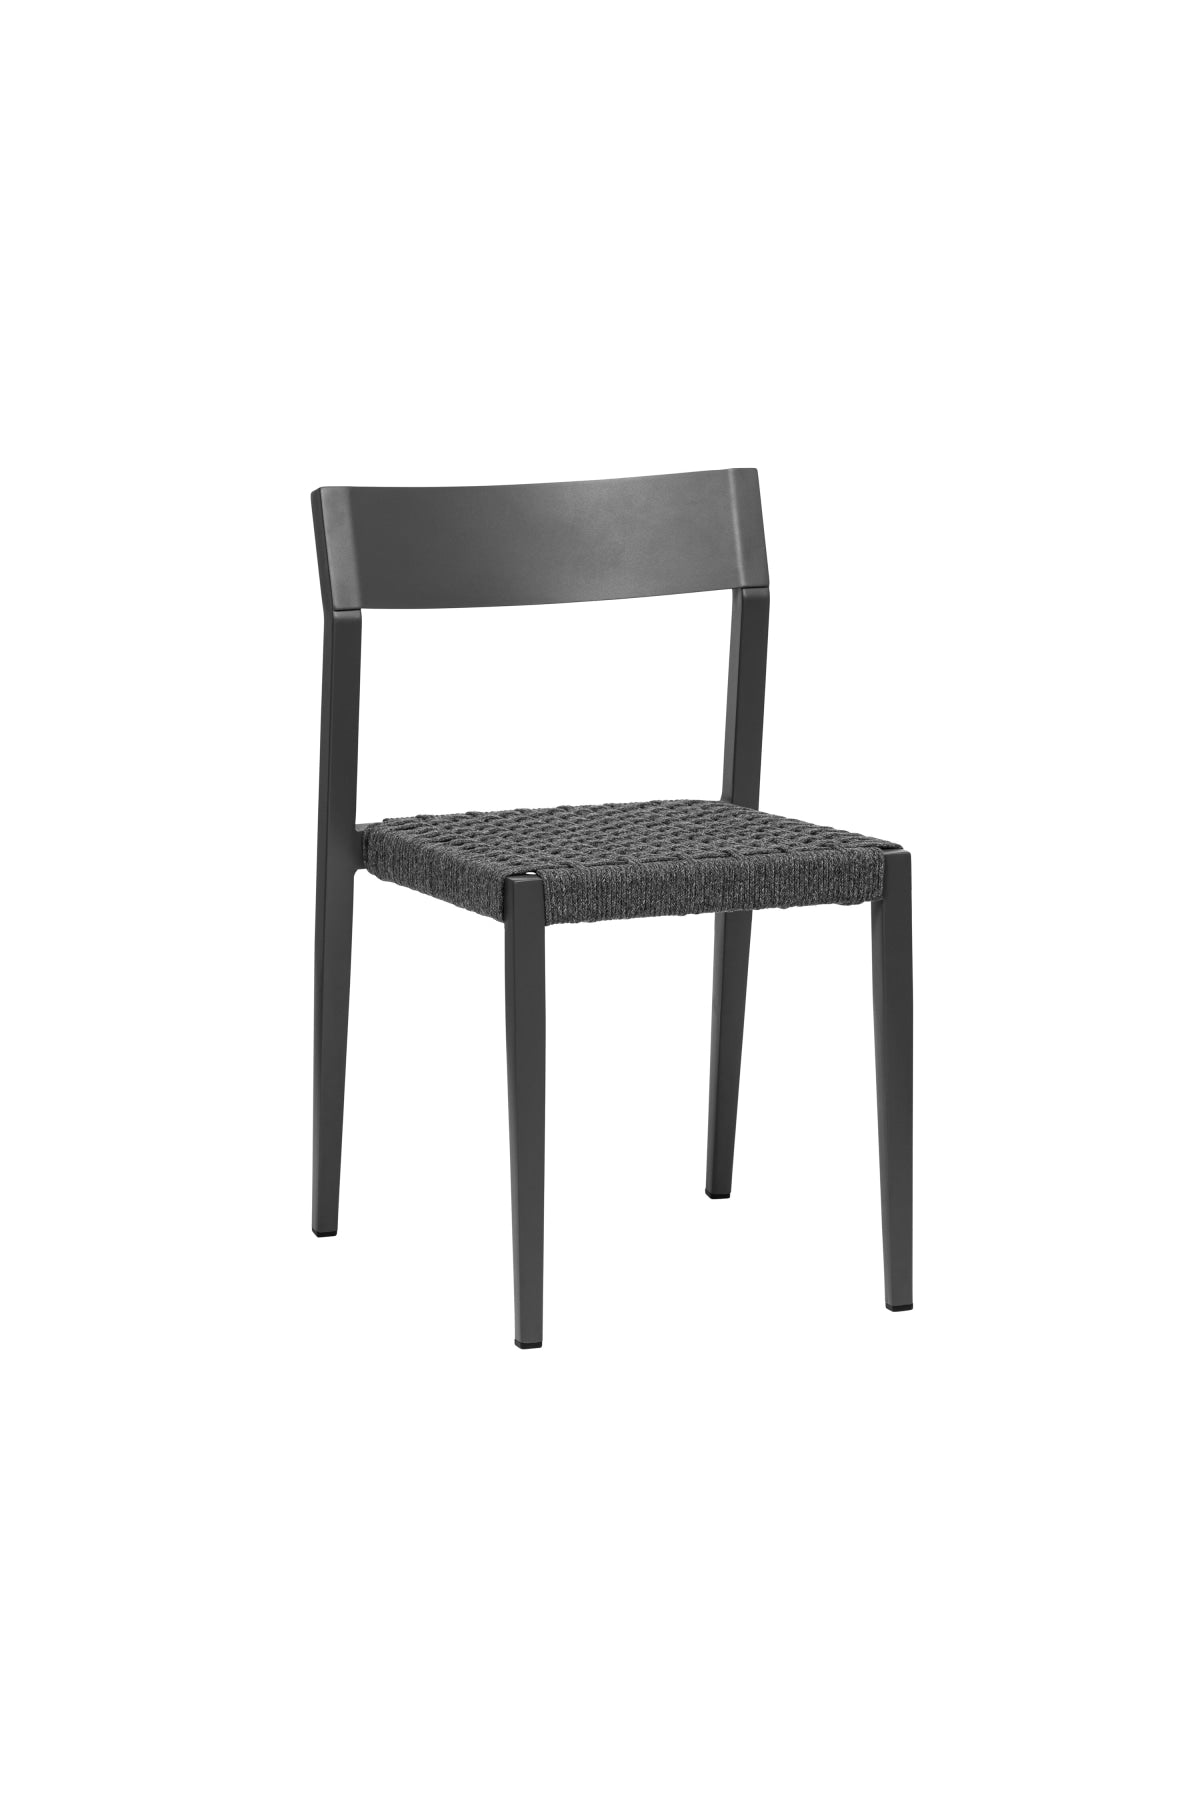 Chelsey Stackable Side Chair in Gray - Set of 2